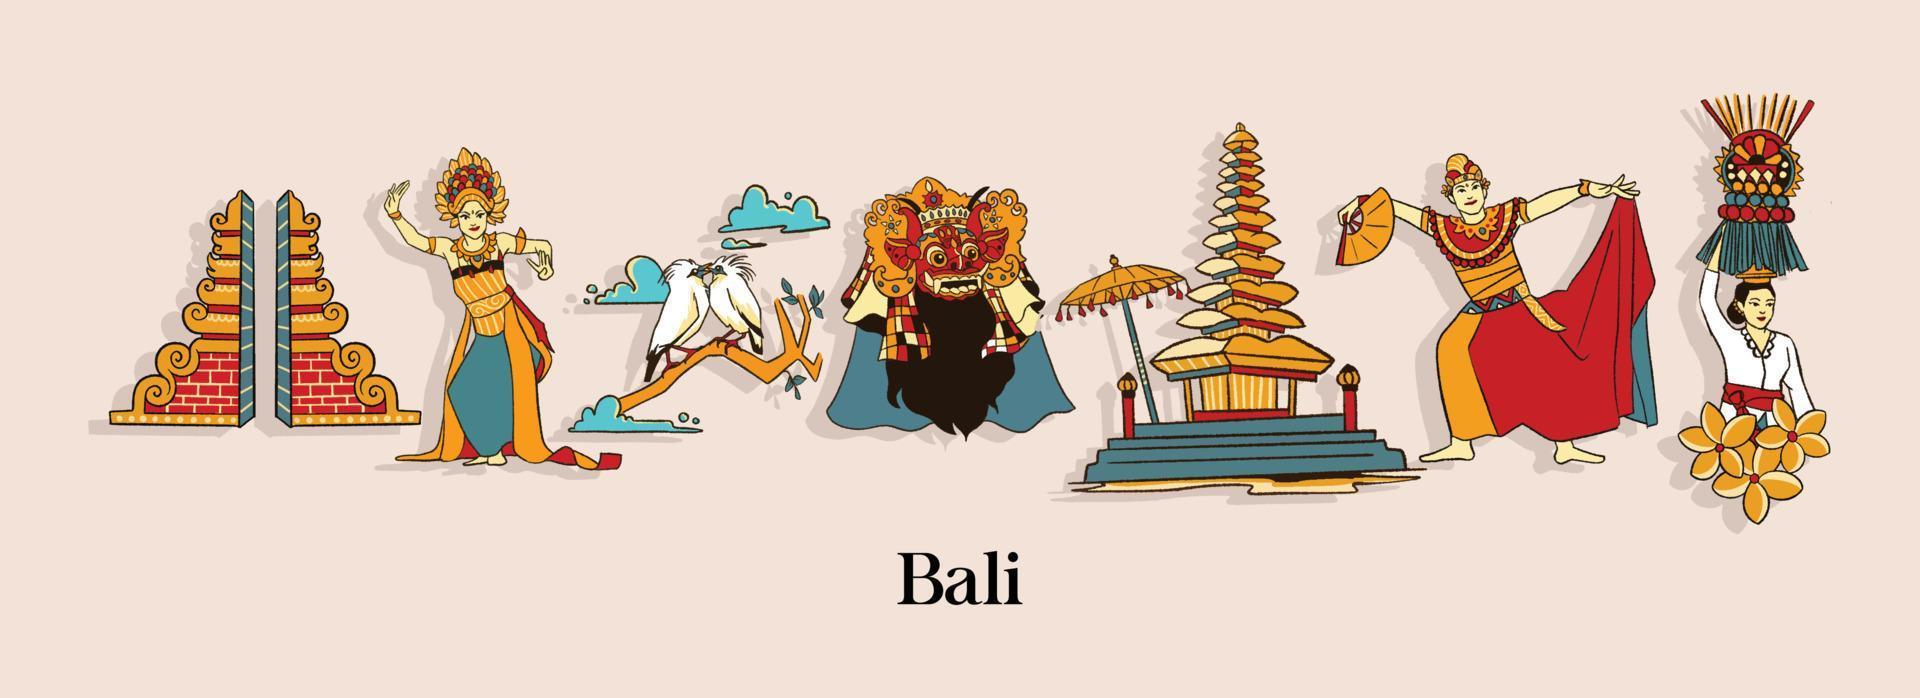 Isolated balinese Illustration. Hand drawn Indonesian cultures vector